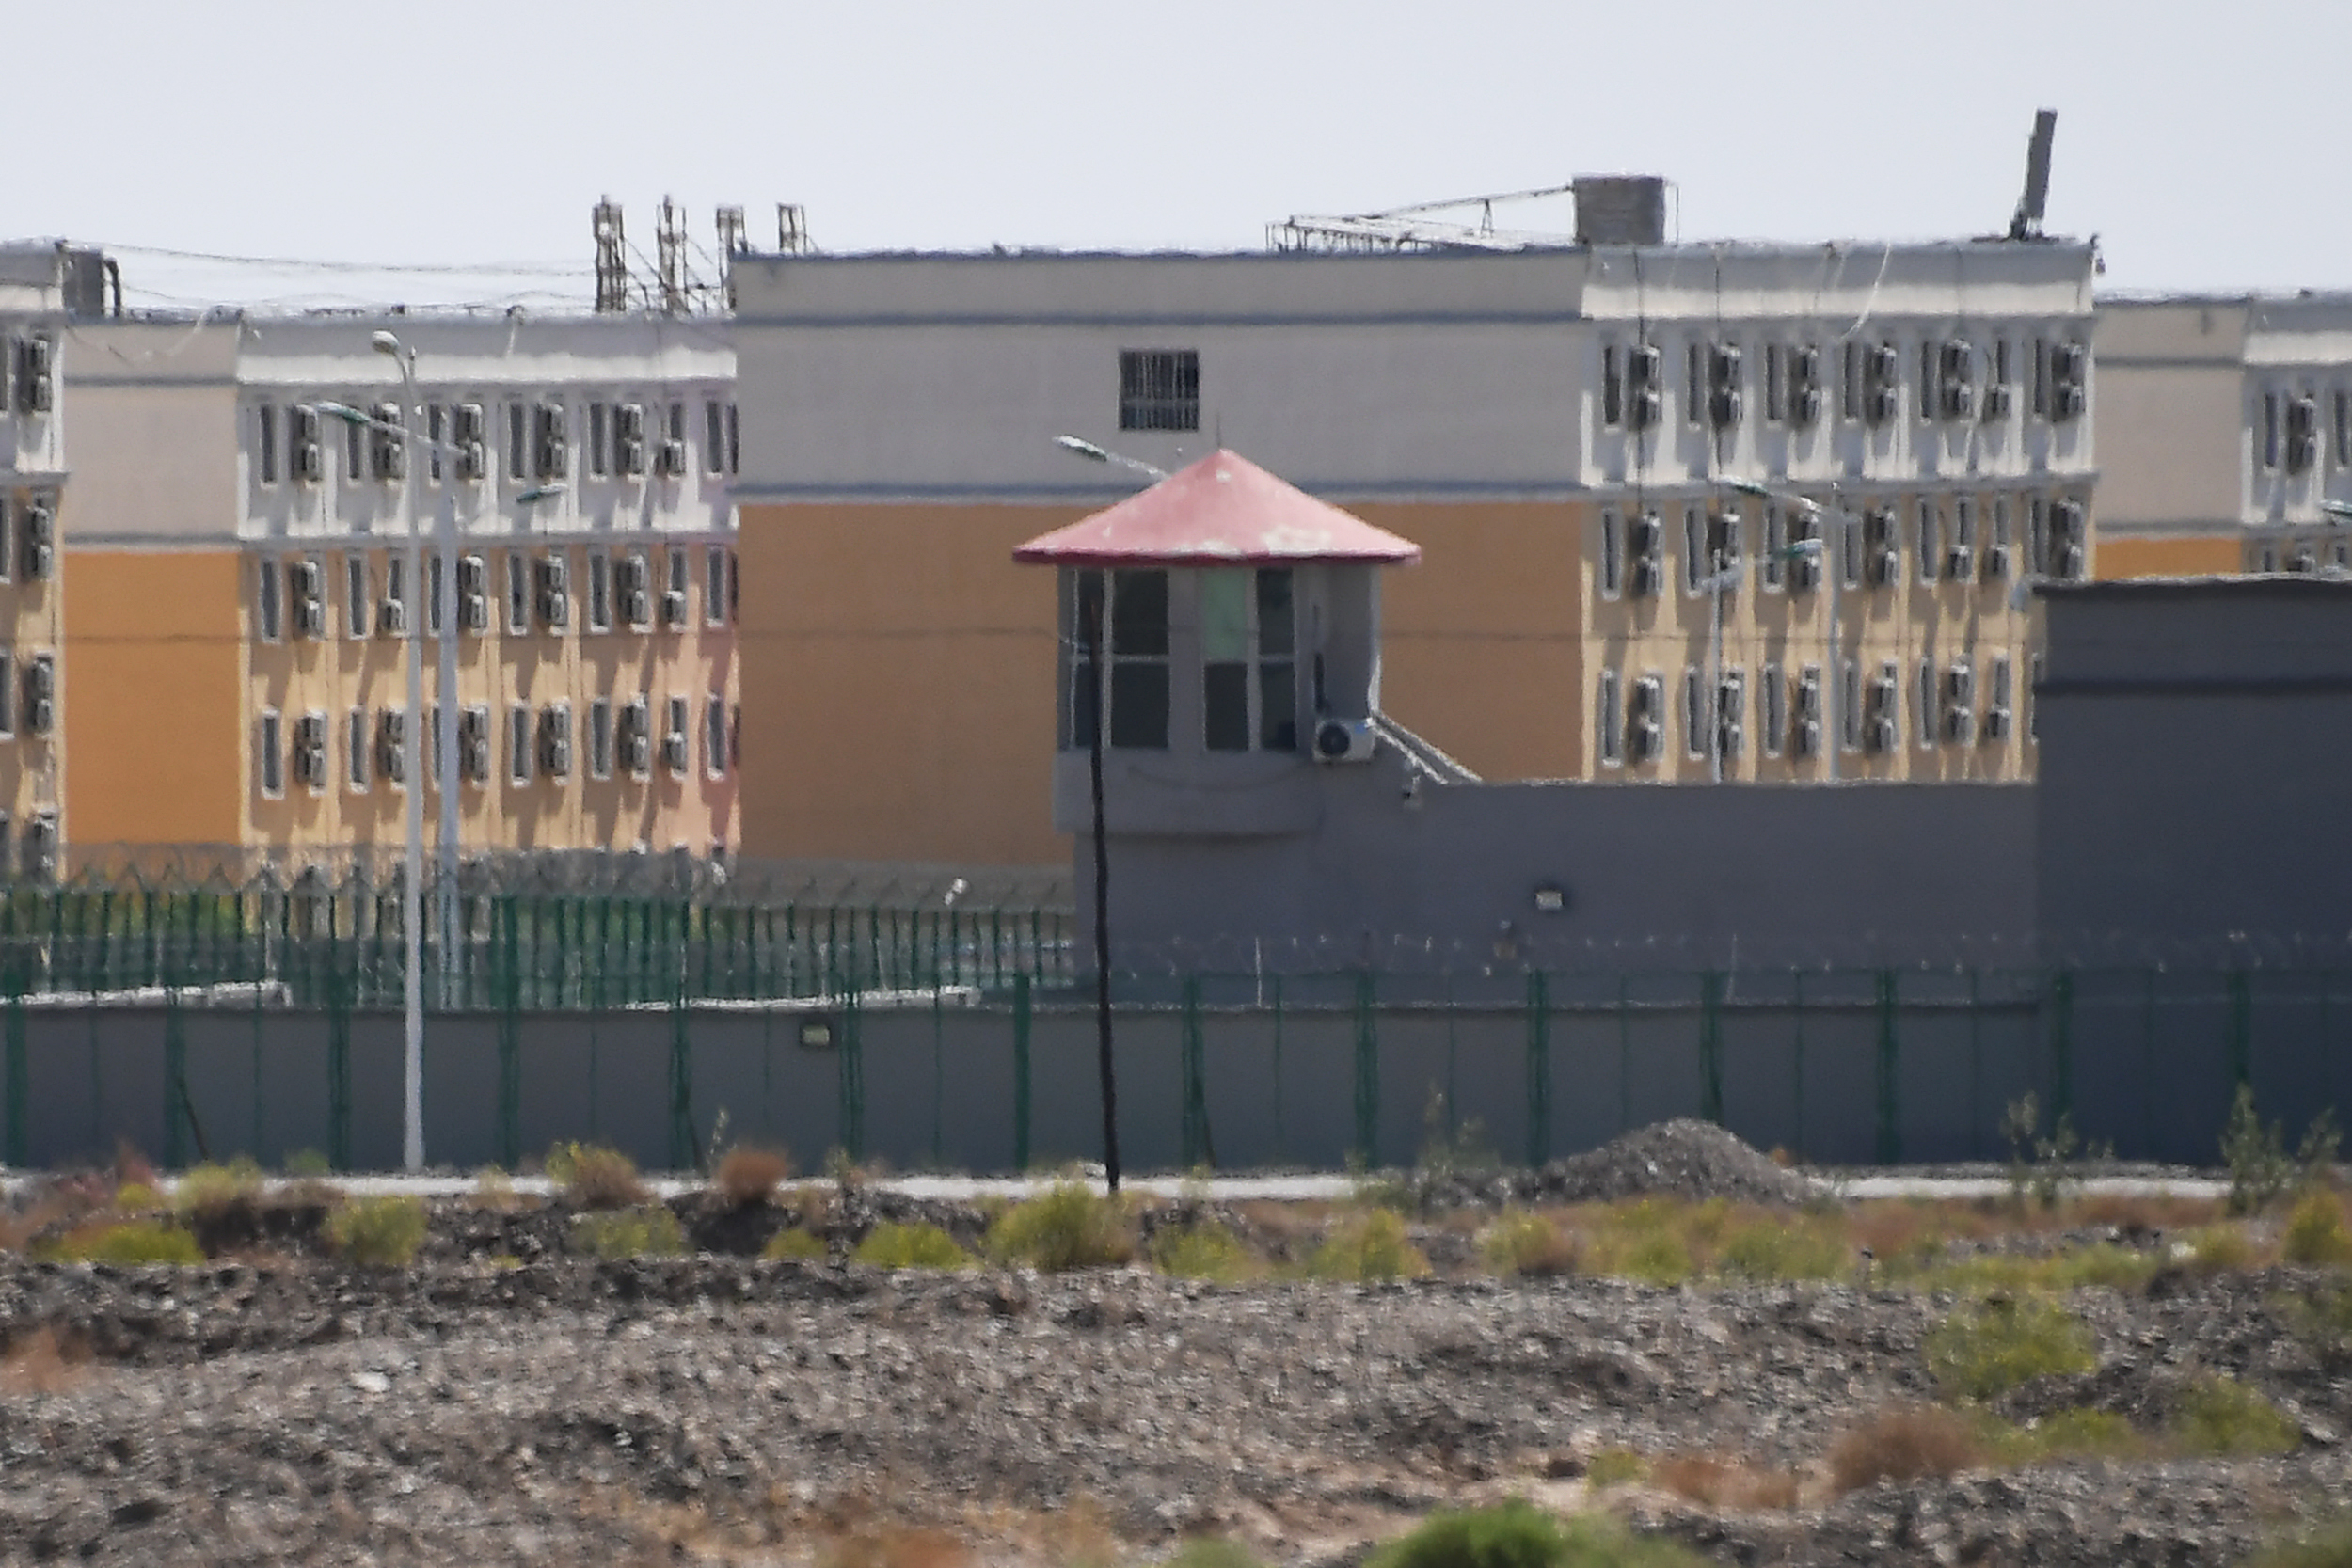 This photo taken on June 2, 2019 shows buildings at the Artux City Vocational Skills Education Training Service Center, believed to be a re-education camp where mostly Muslim ethnic minorities are detained, north of Kashgar in China's northwestern Xinjiang region. (GREG BAKER/AFP via Getty Images)